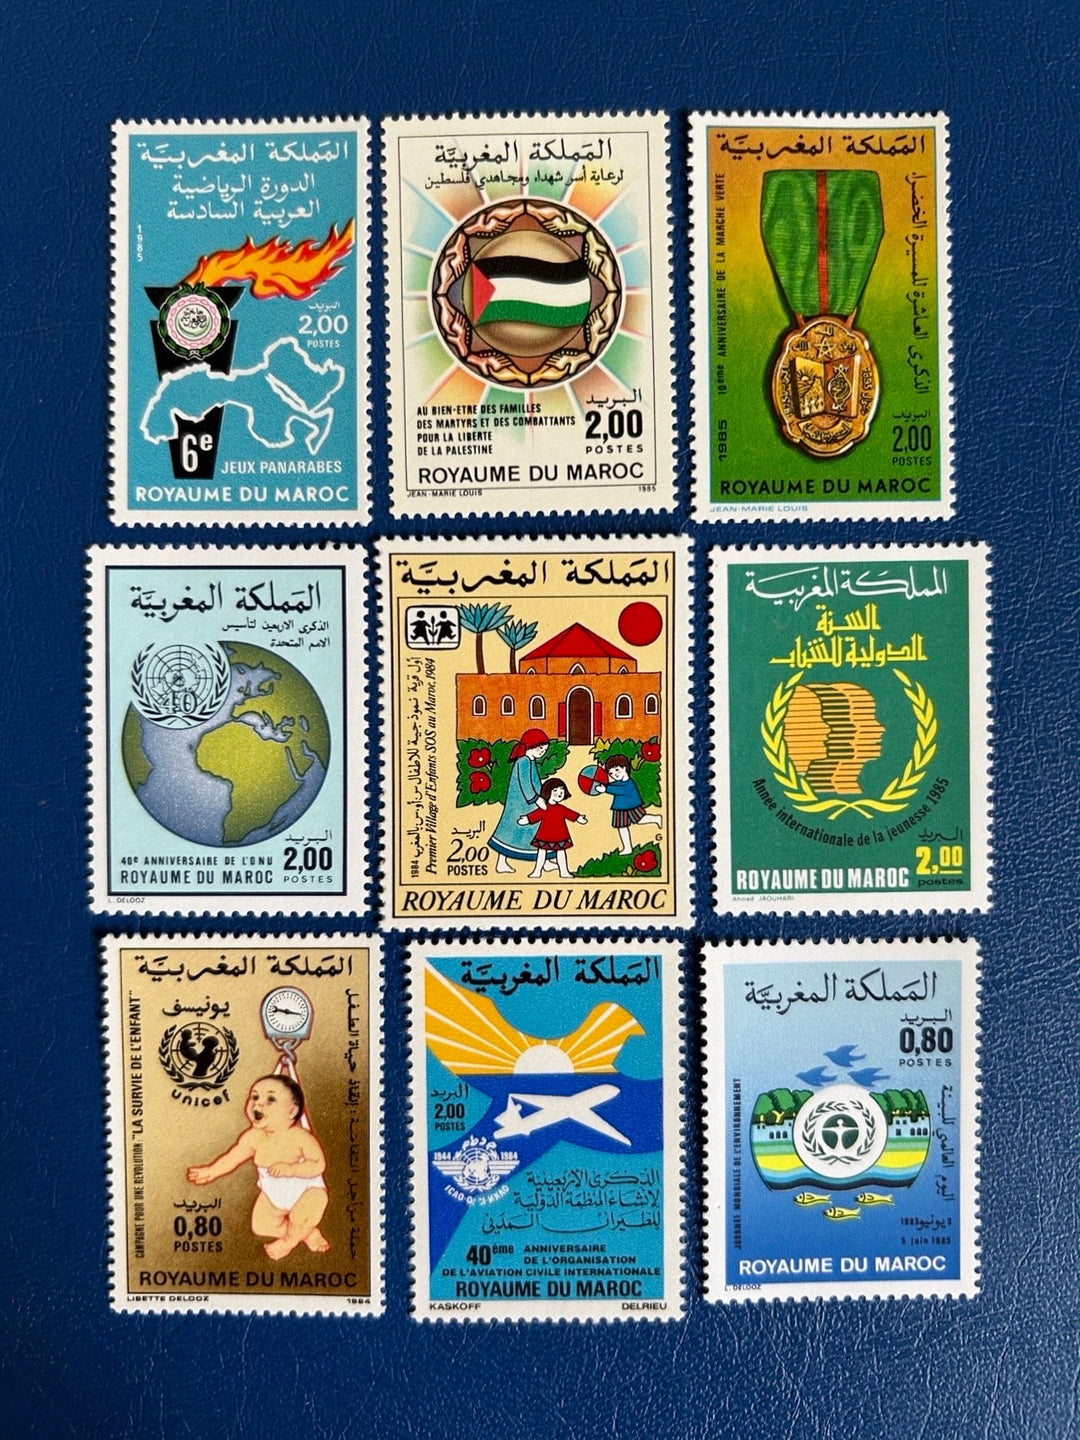 Morocco - Original Vintage Postage Stamps- 1985 - Mix -for the collector, artist or crafter